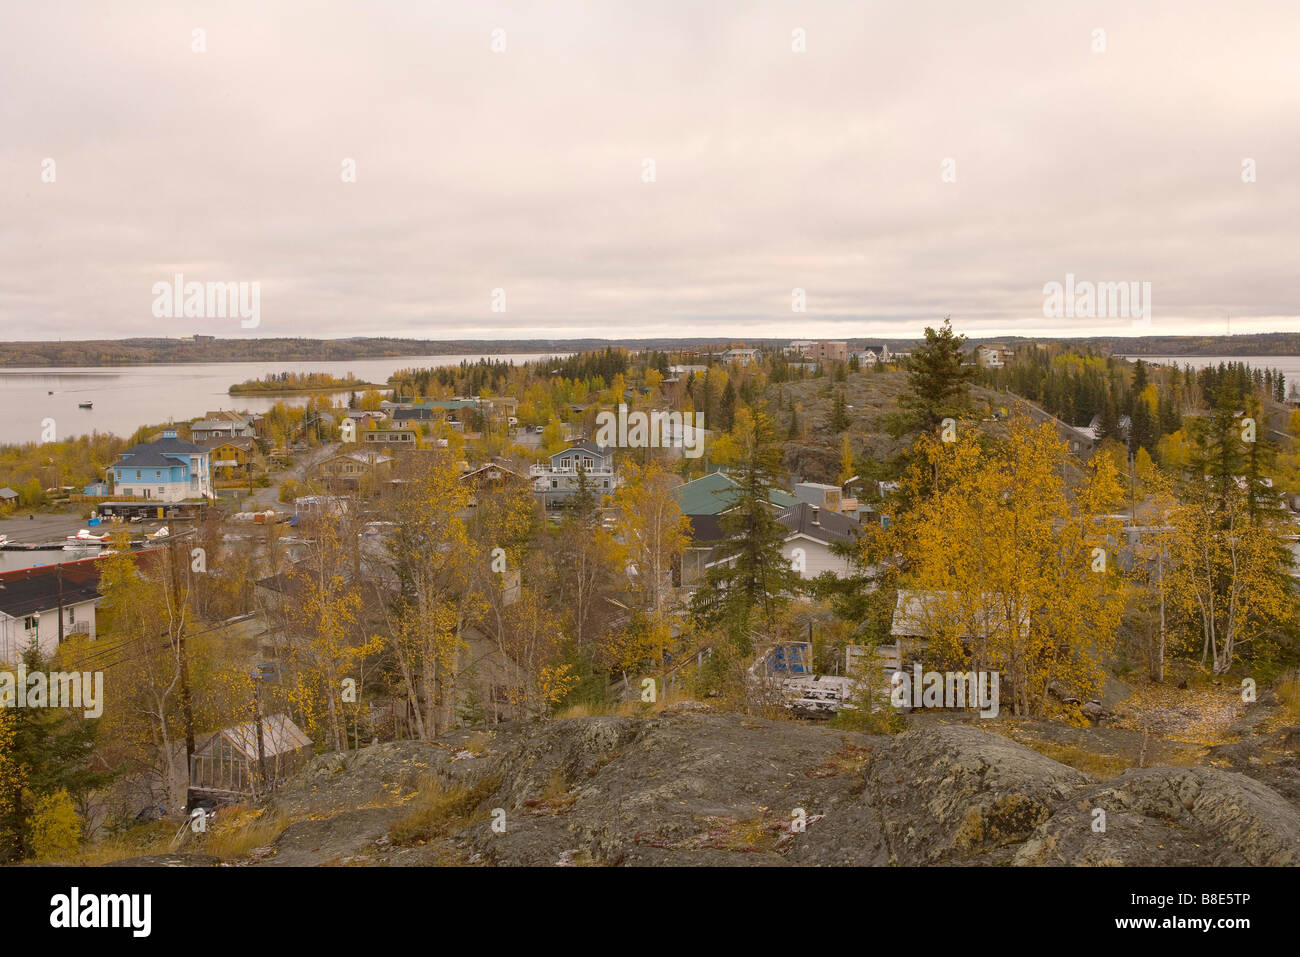 Community of traditional houses, Great Slave Lake, Yellowknife Northwest Territories, Canada Stock Photo